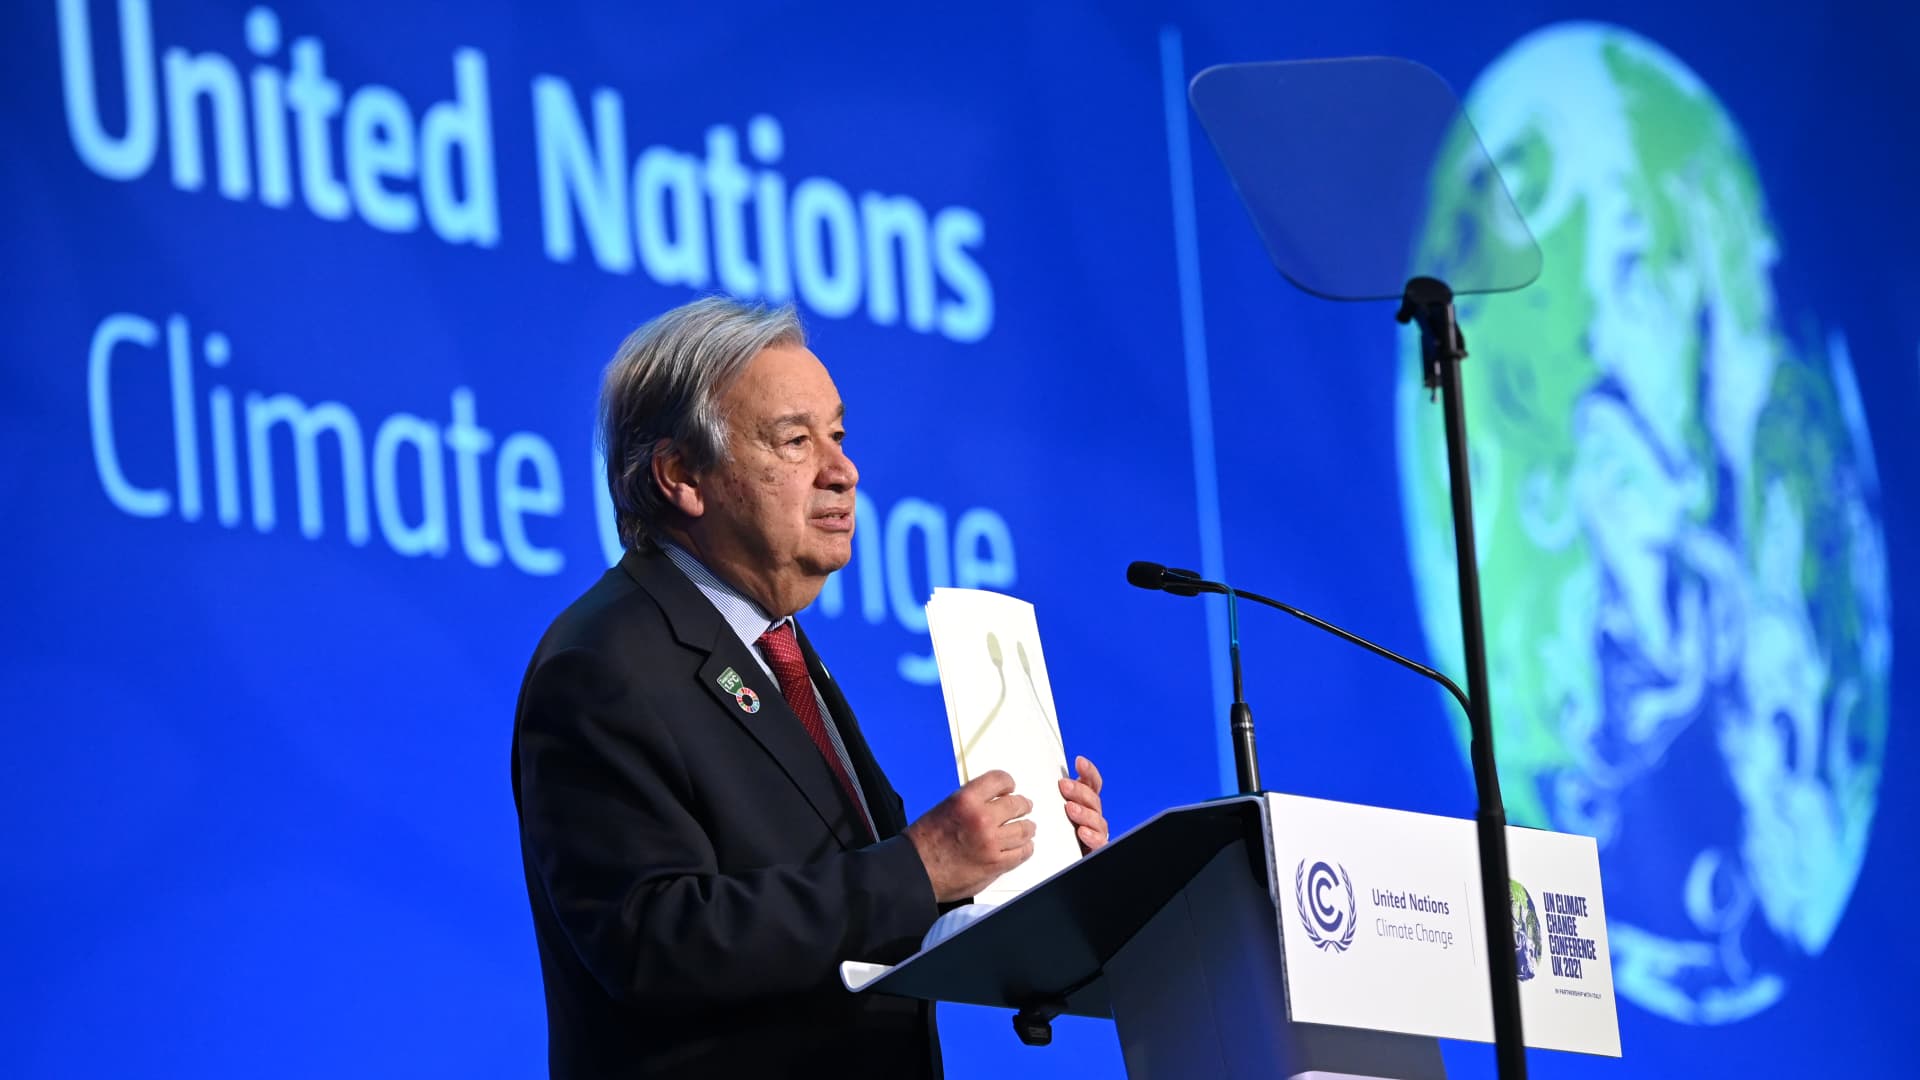 GLASGOW, SCOTLAND - NOVEMBER 11: António Guterres, Secretary-General of the United Nations, speaks during the Global Climate Action High-level event.